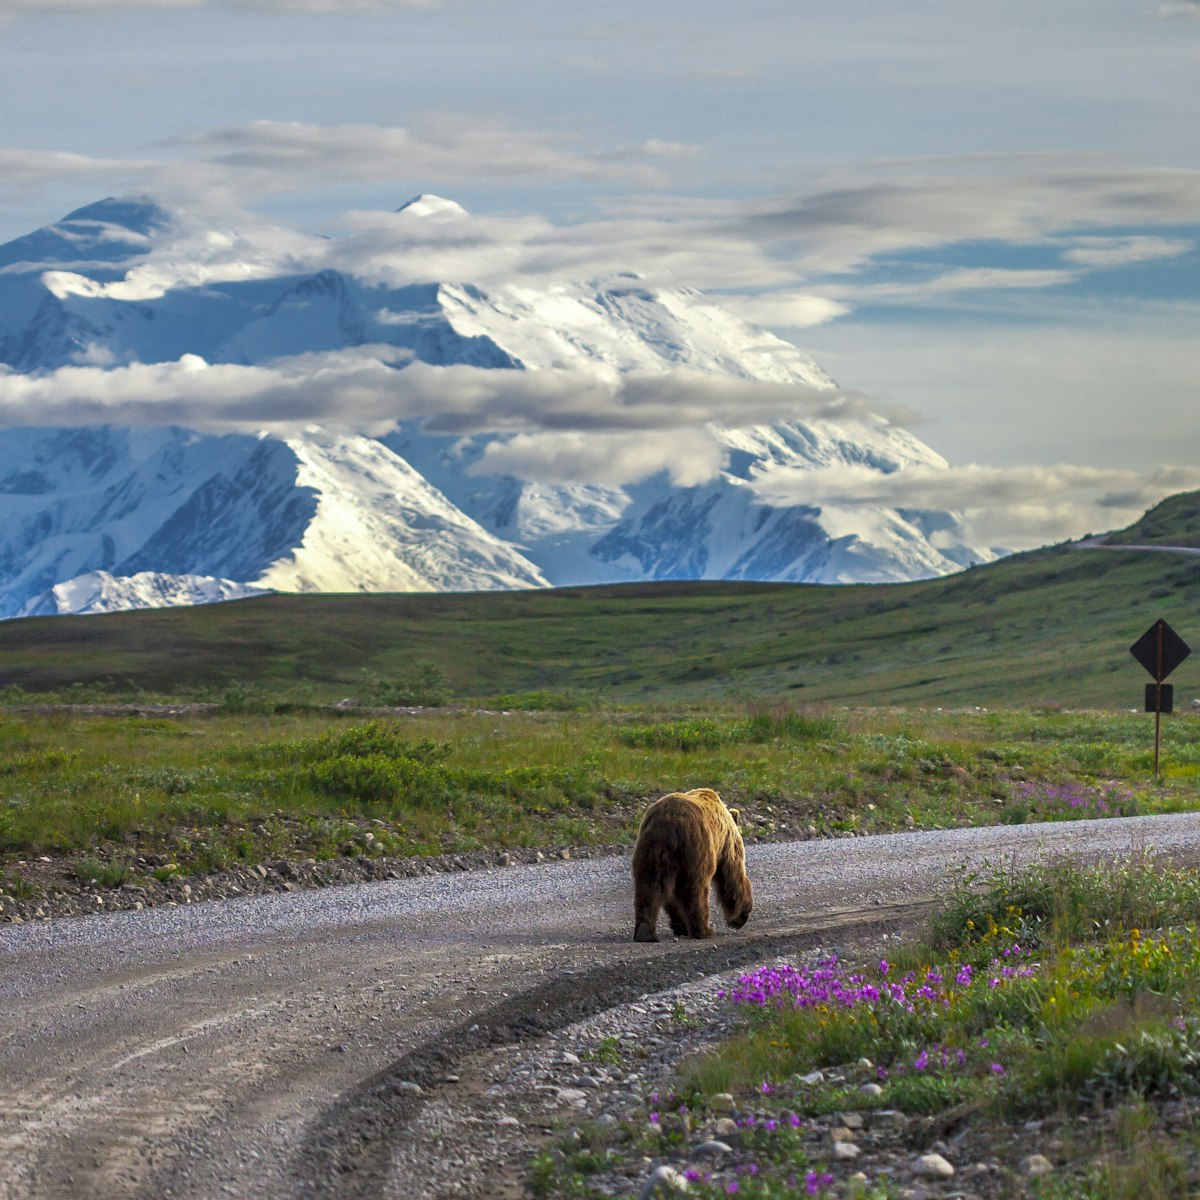 Driving in Denali National Park, grizzly bear walking down the road in the late evening when Mount McKinley was in full view.